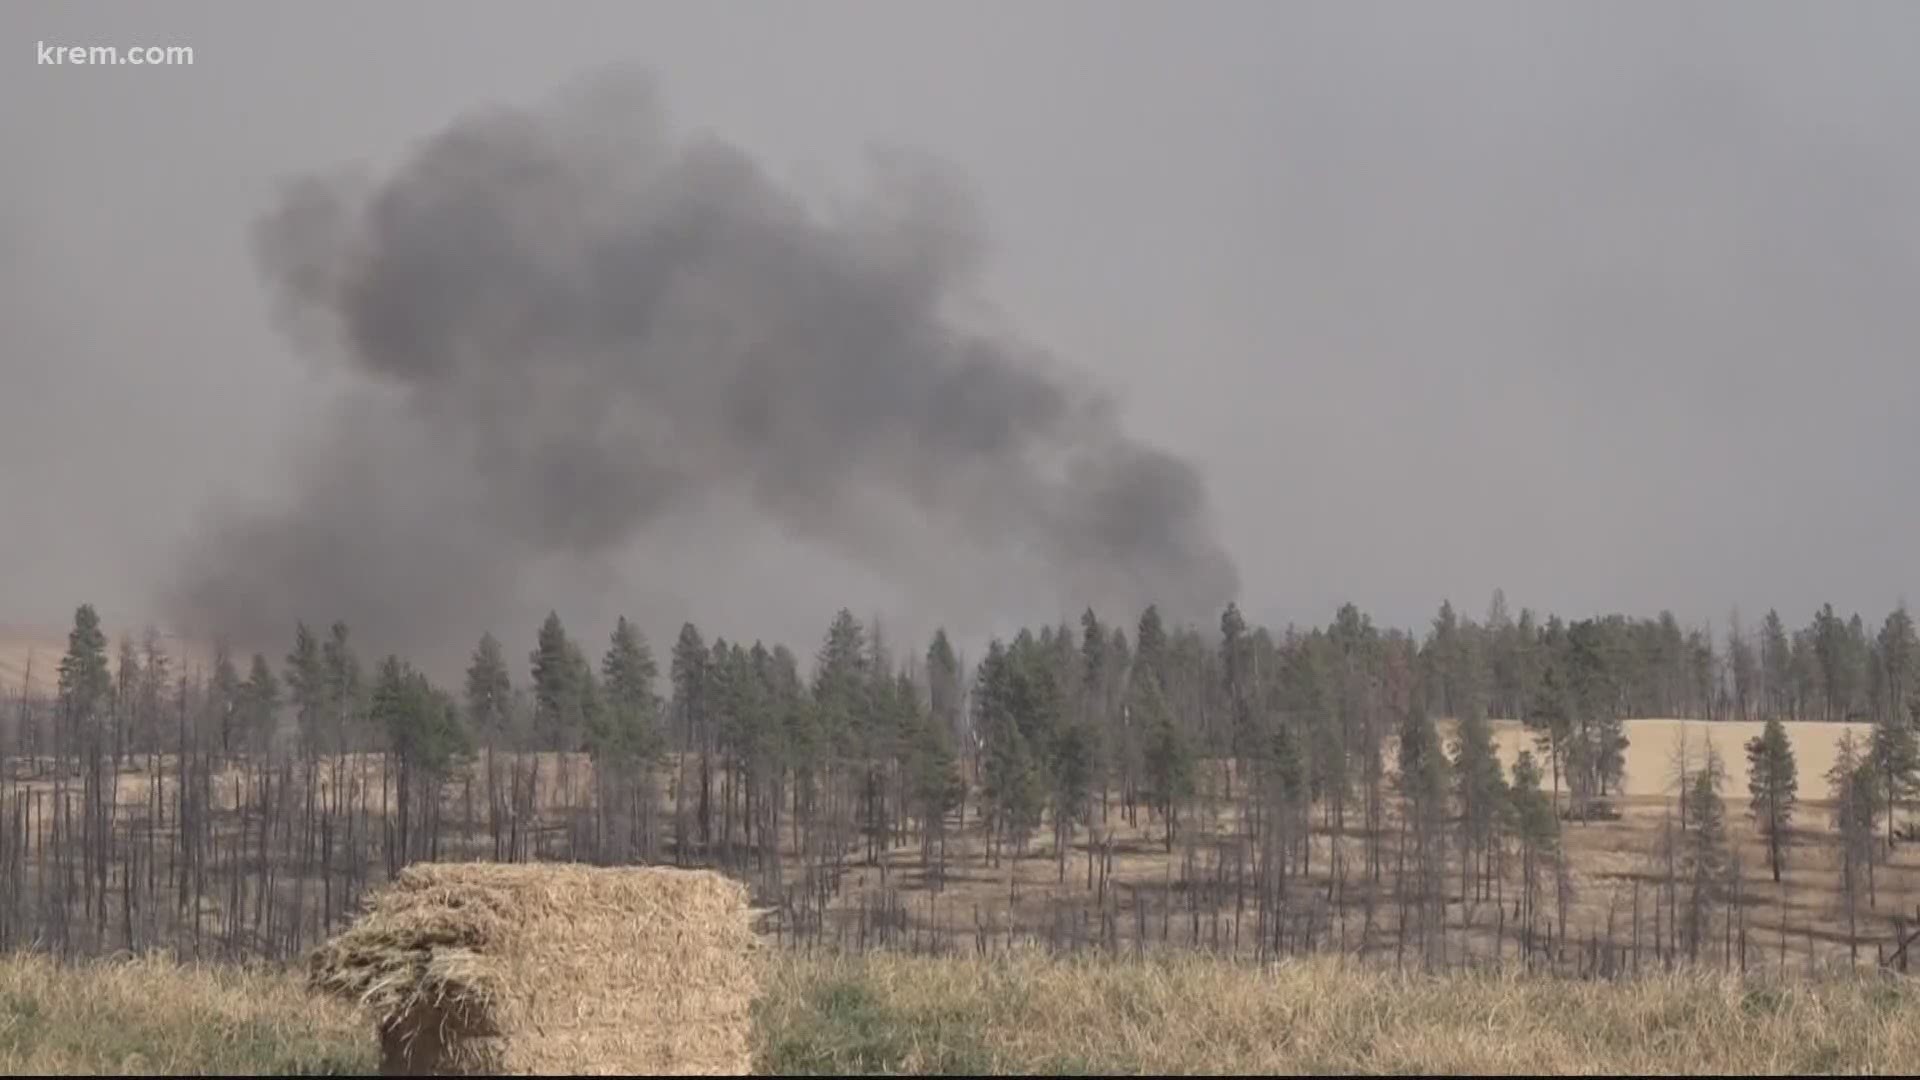 wildfire in spangle grows to 320 acres structures threatened krem com wildfire in spangle grows to 320 acres structures threatened